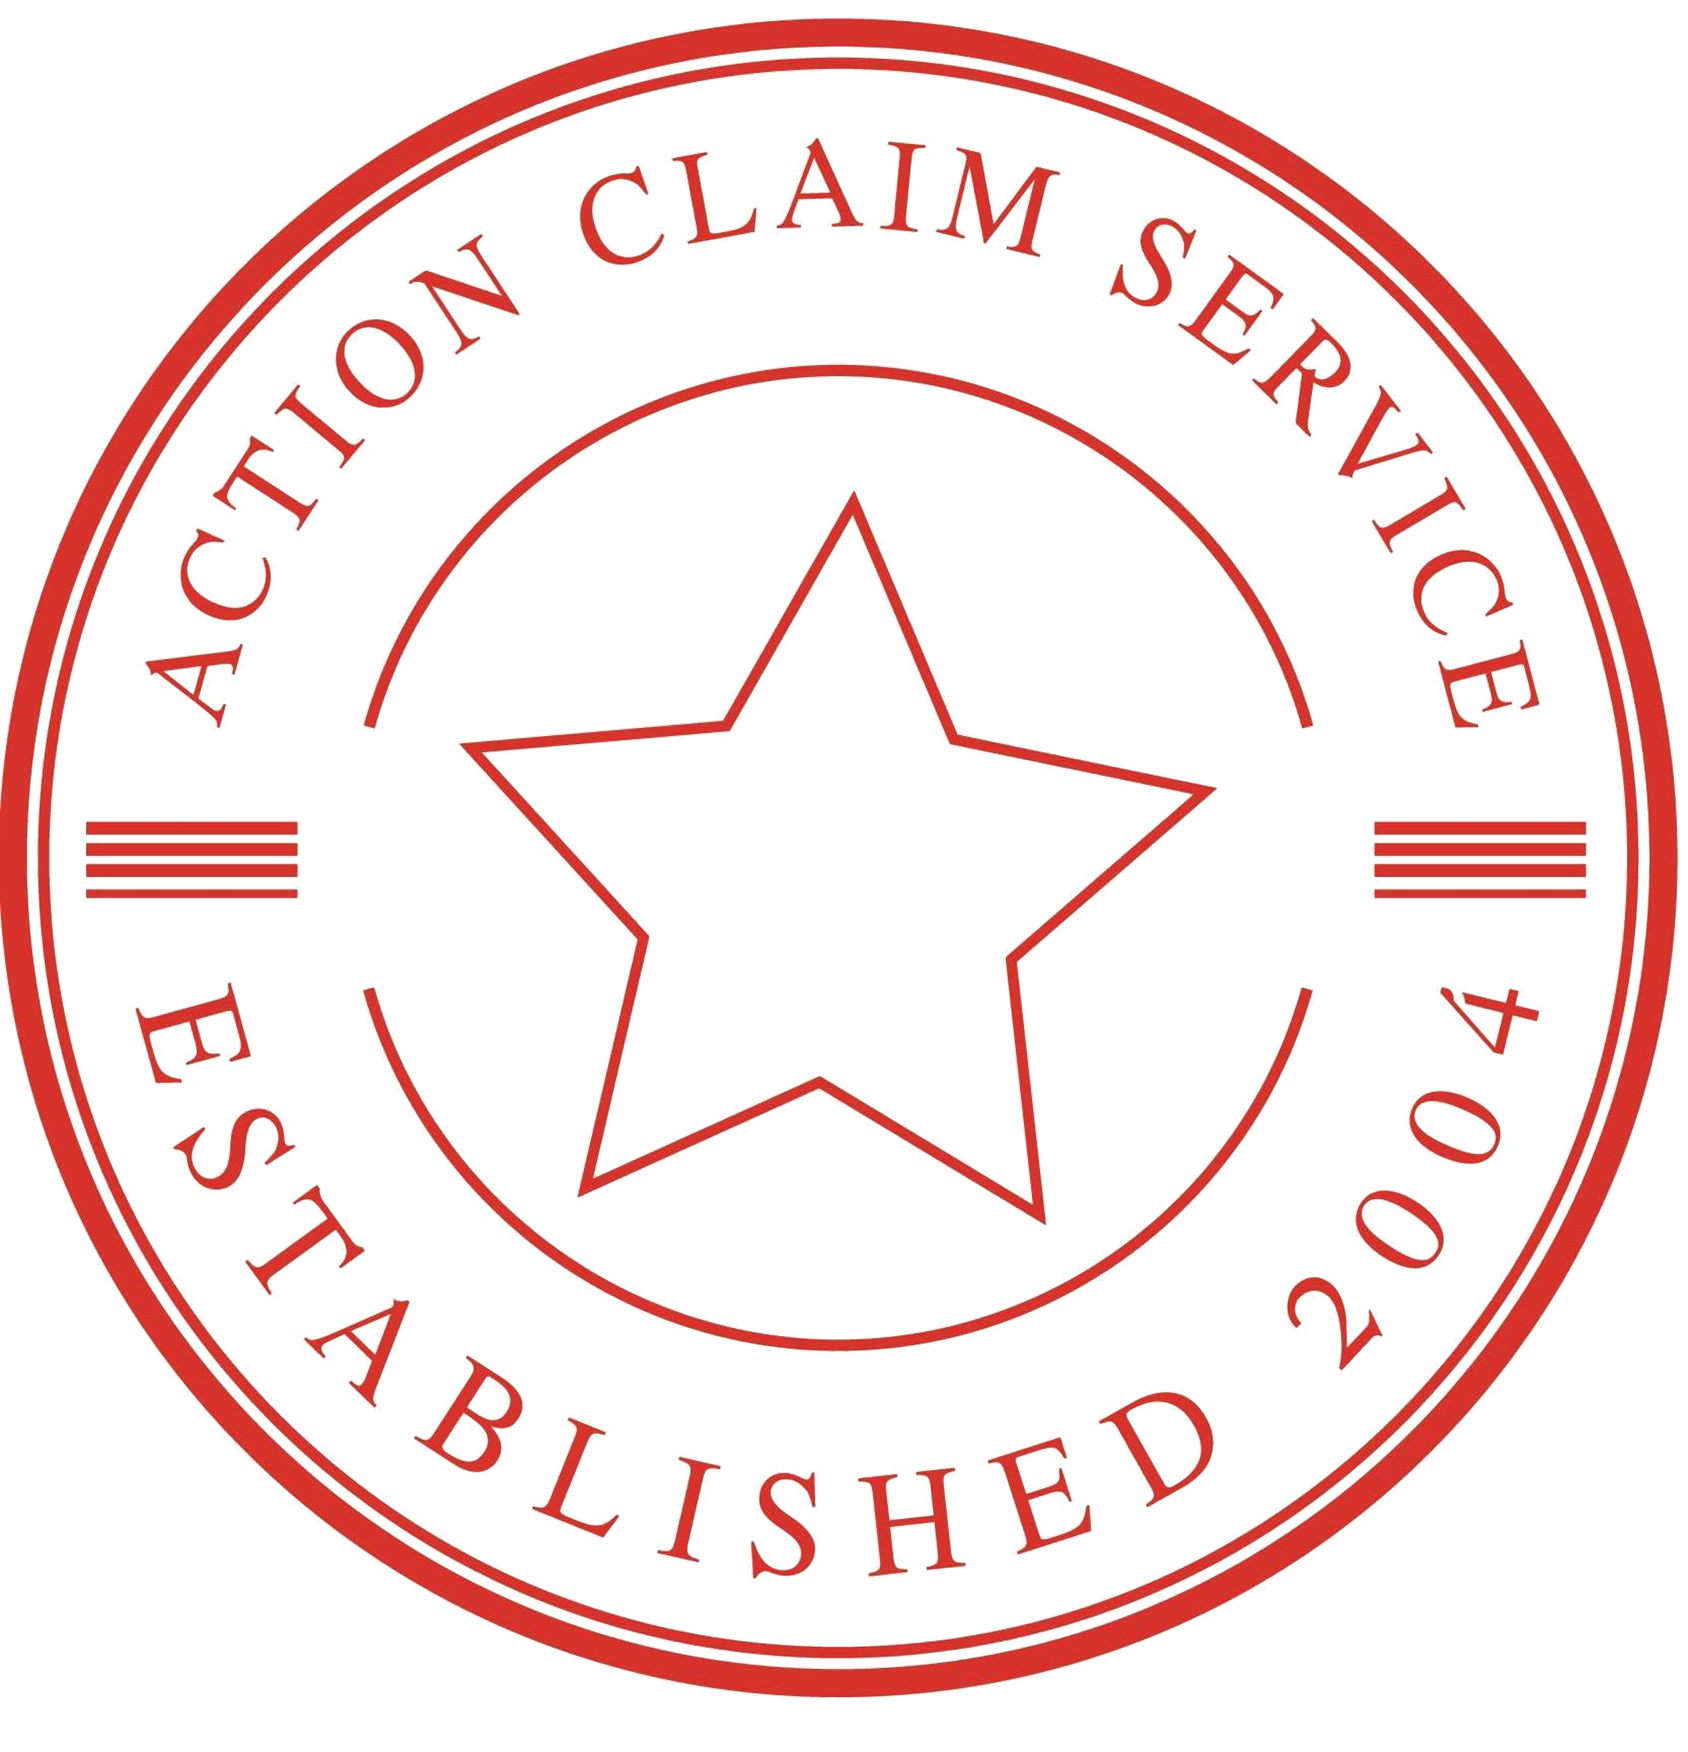 Action Claim (Logo).png